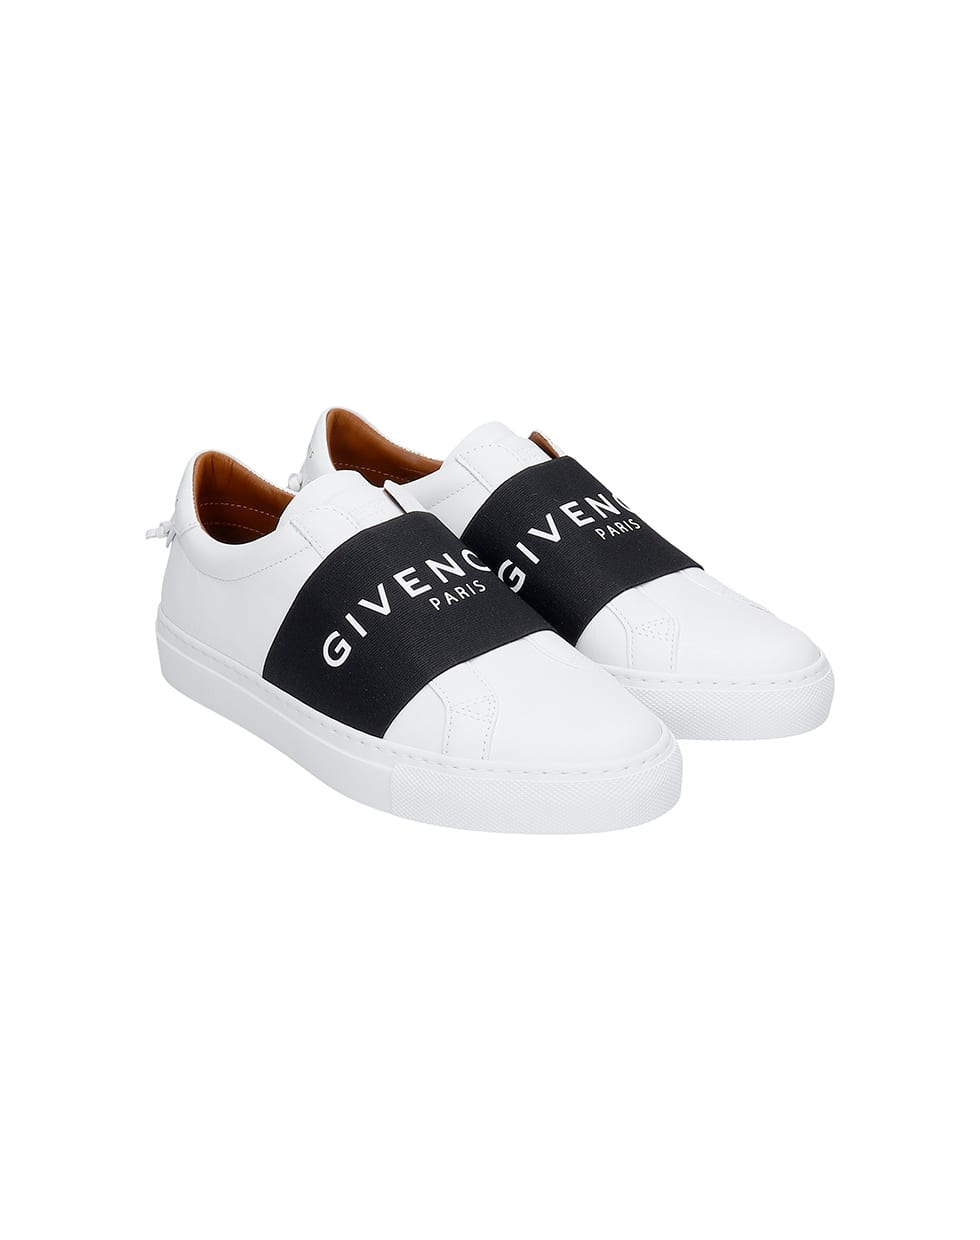 Givenchy Urban Street Sneakers In White Leather - white